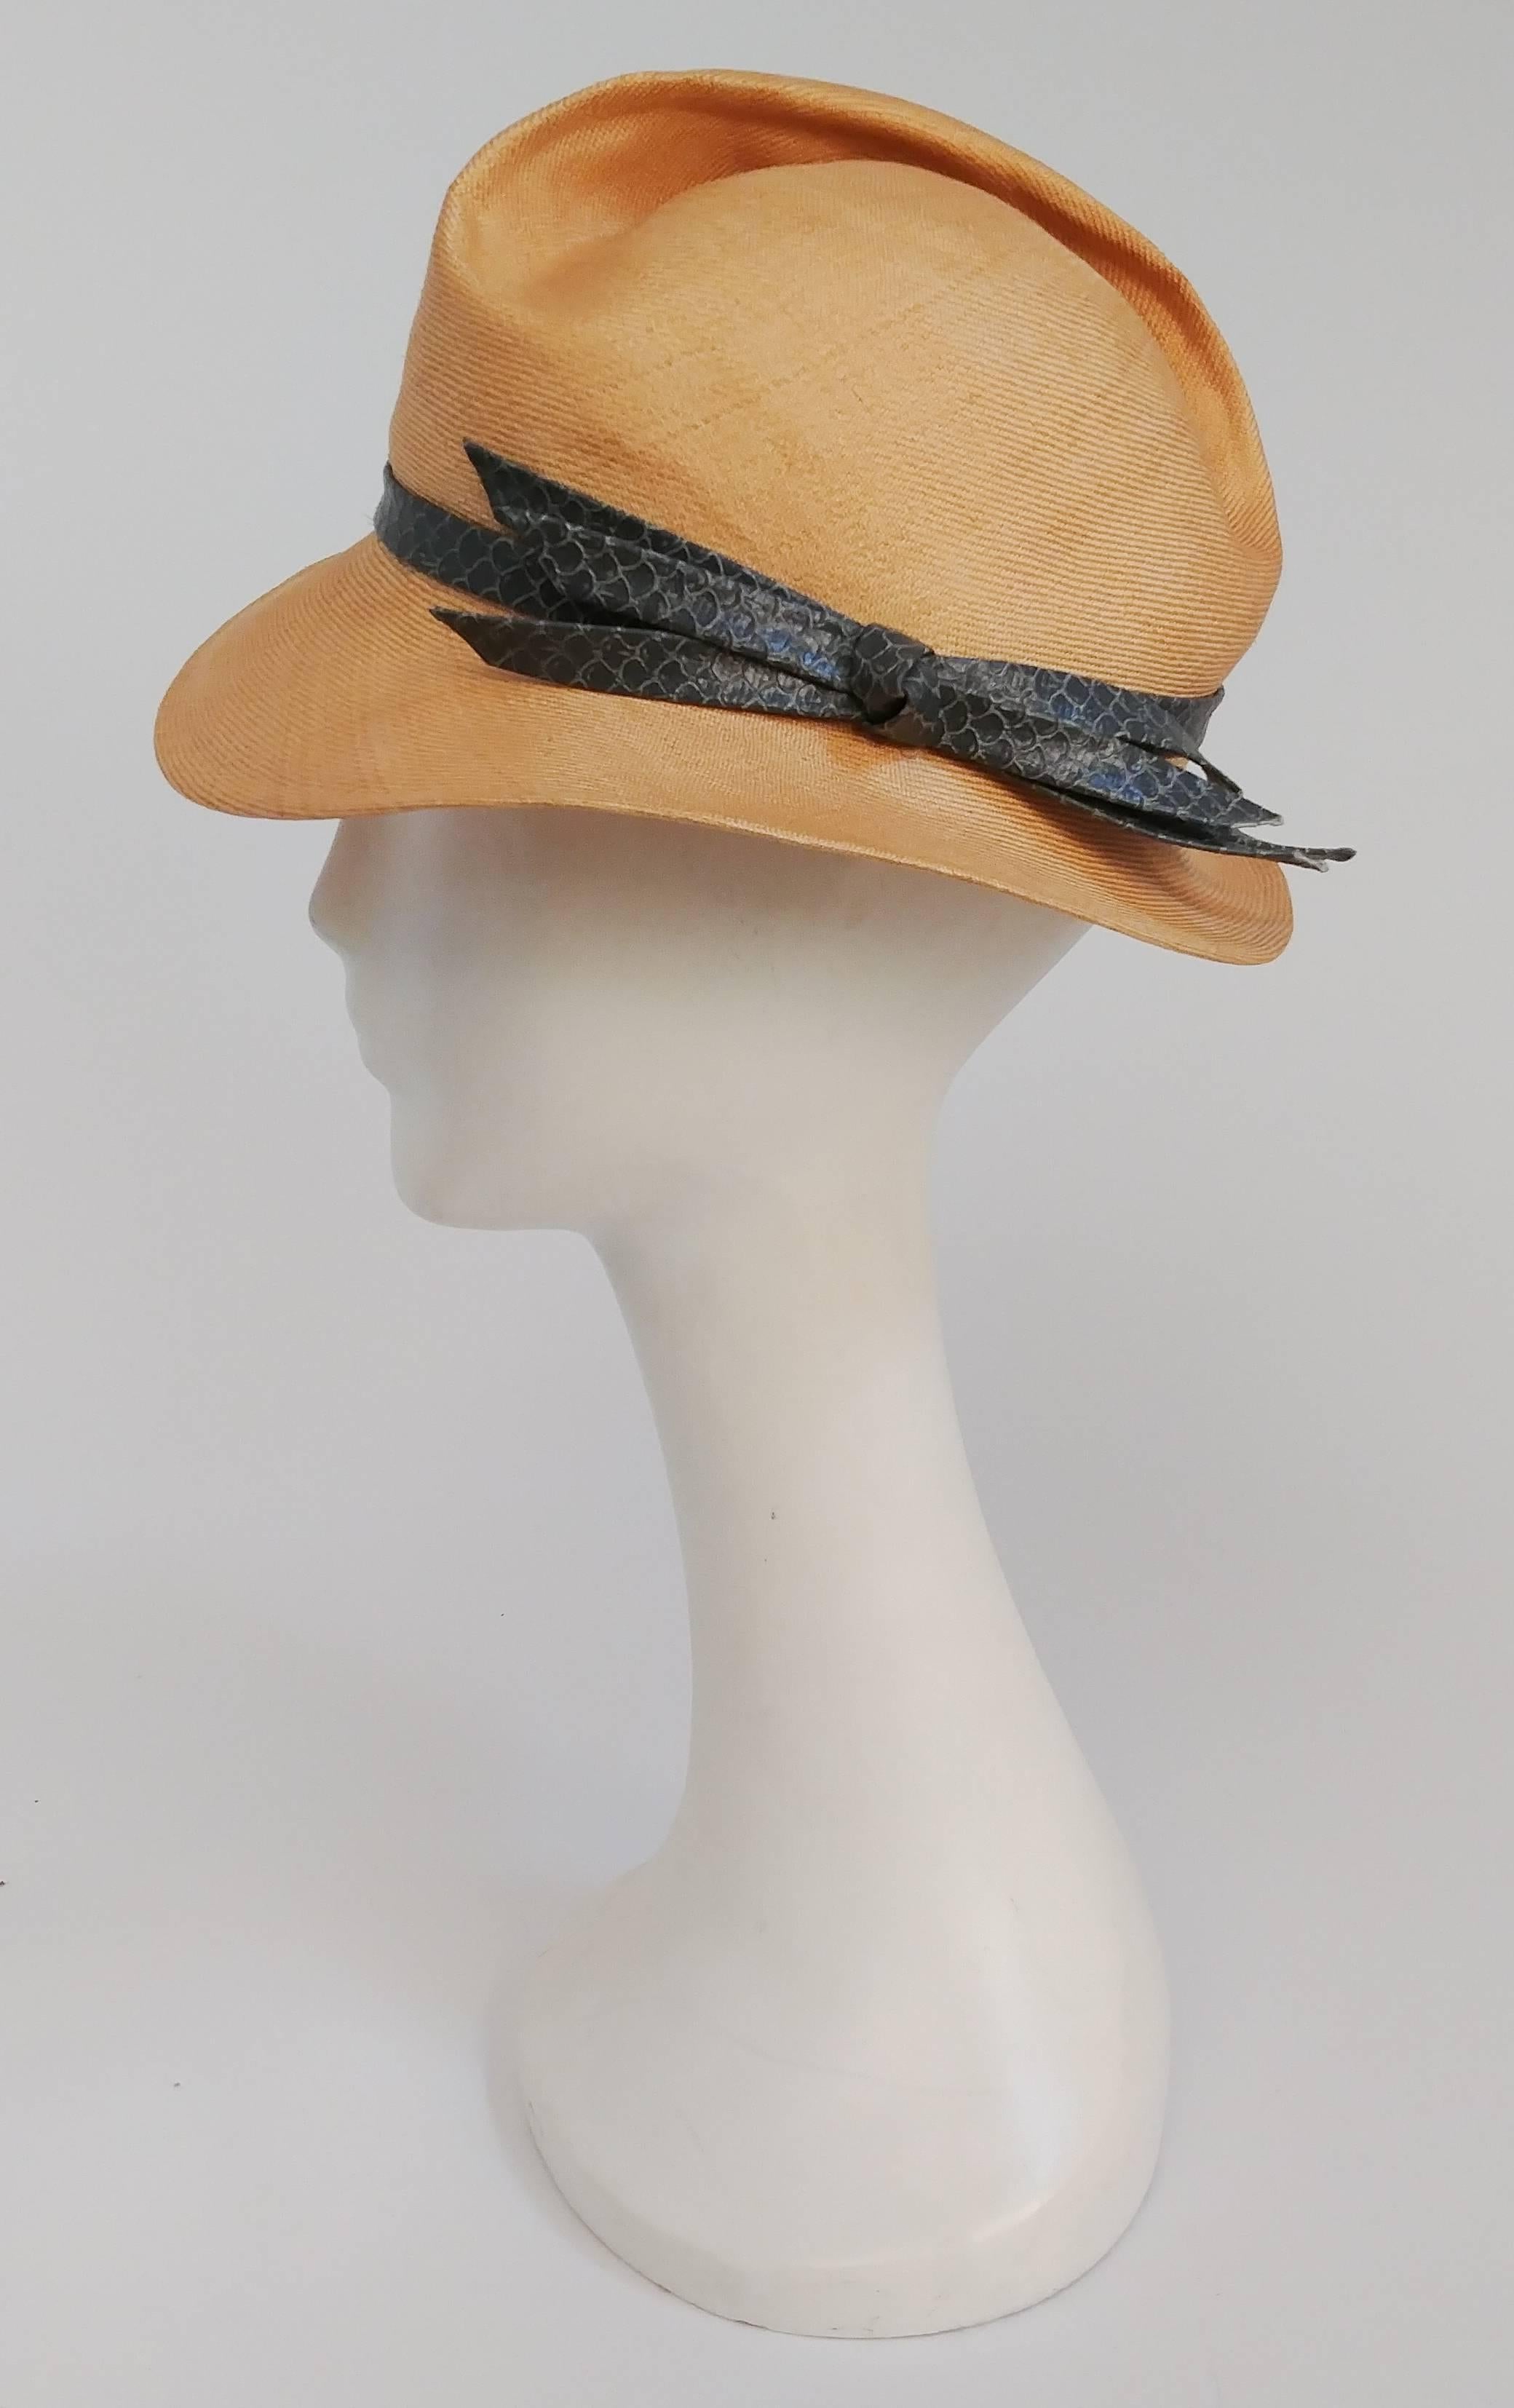 1980s Adolfo Straw Sculptural Panama w/ Faux Snake Band. Hat has been shaped and is held in place with ribbon inside the hat to keep its sculptural shape. Hat measures 21